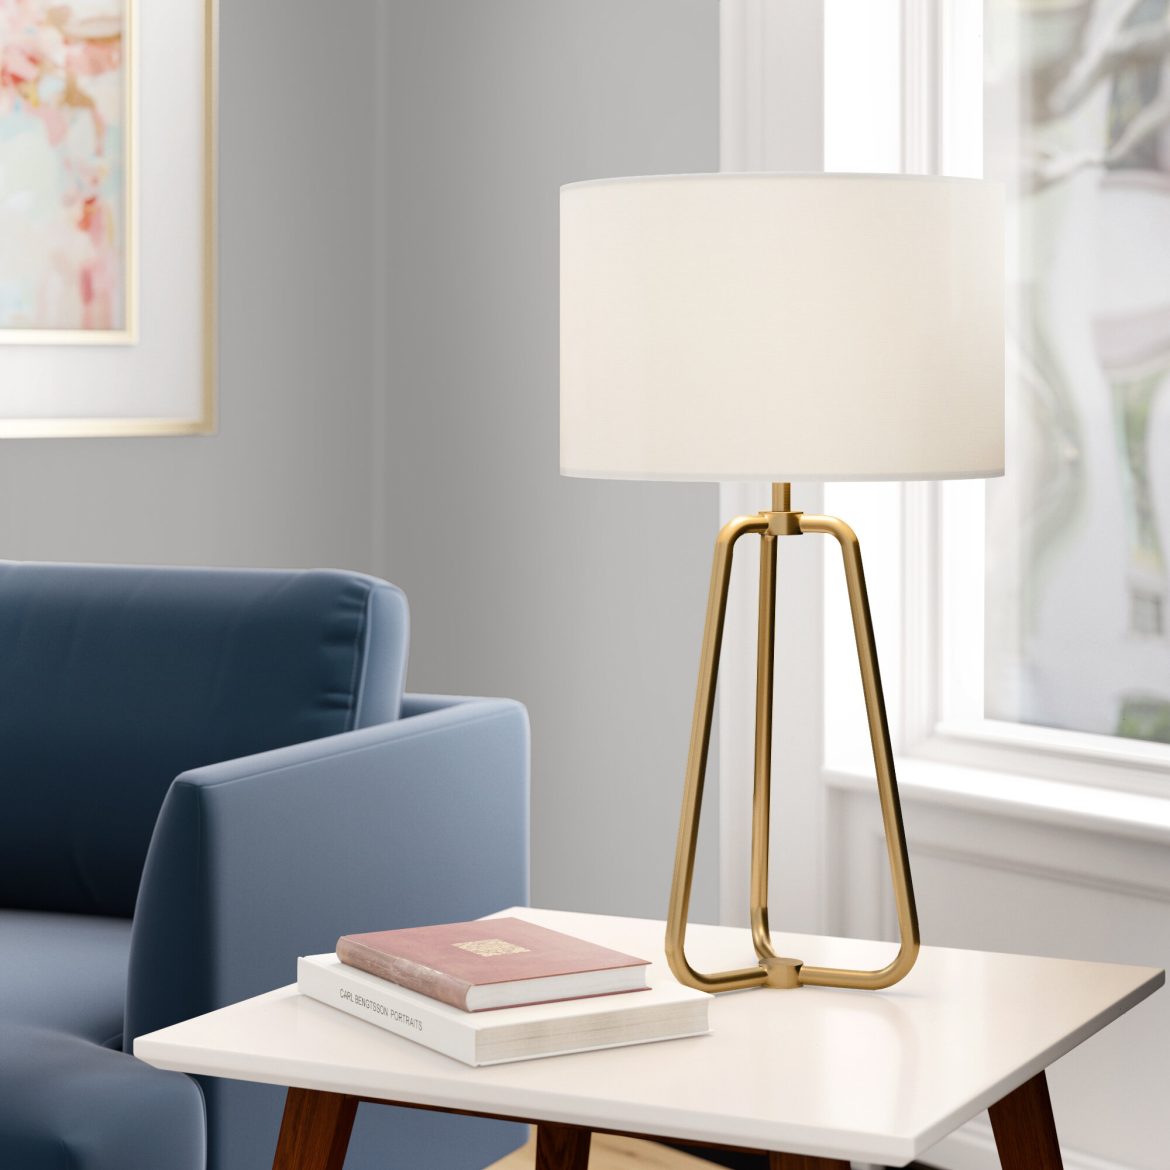 Add Dynamic Lighting to Your Home With a Table Lamp